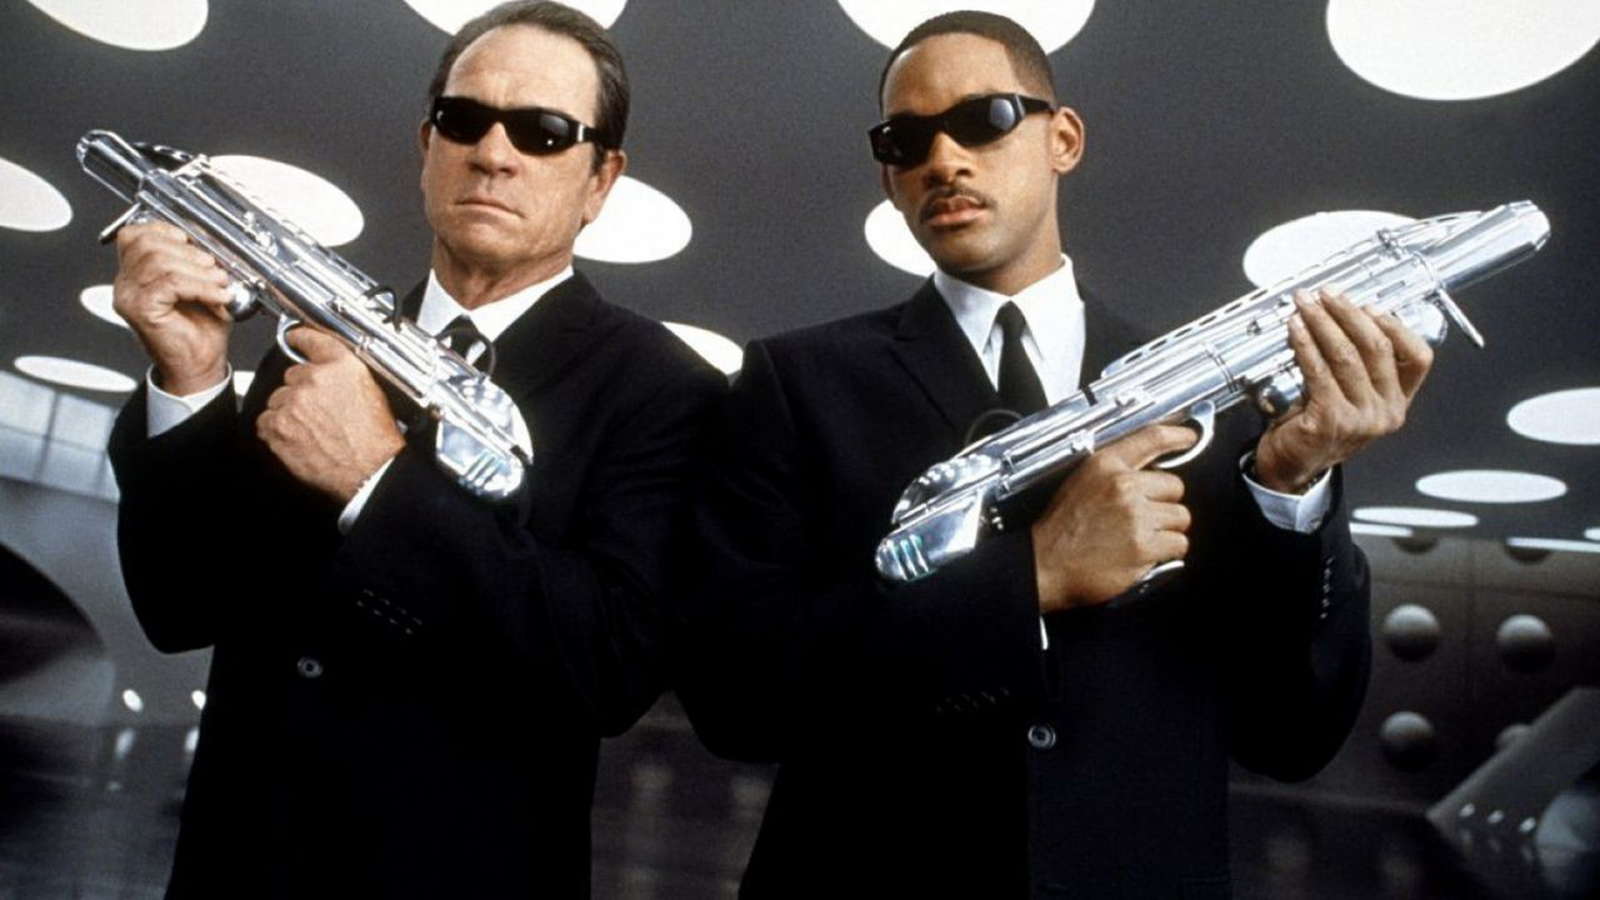 Tommy Lee Jones and Will Smith in Men in Black. (Image: Sony Pictures)